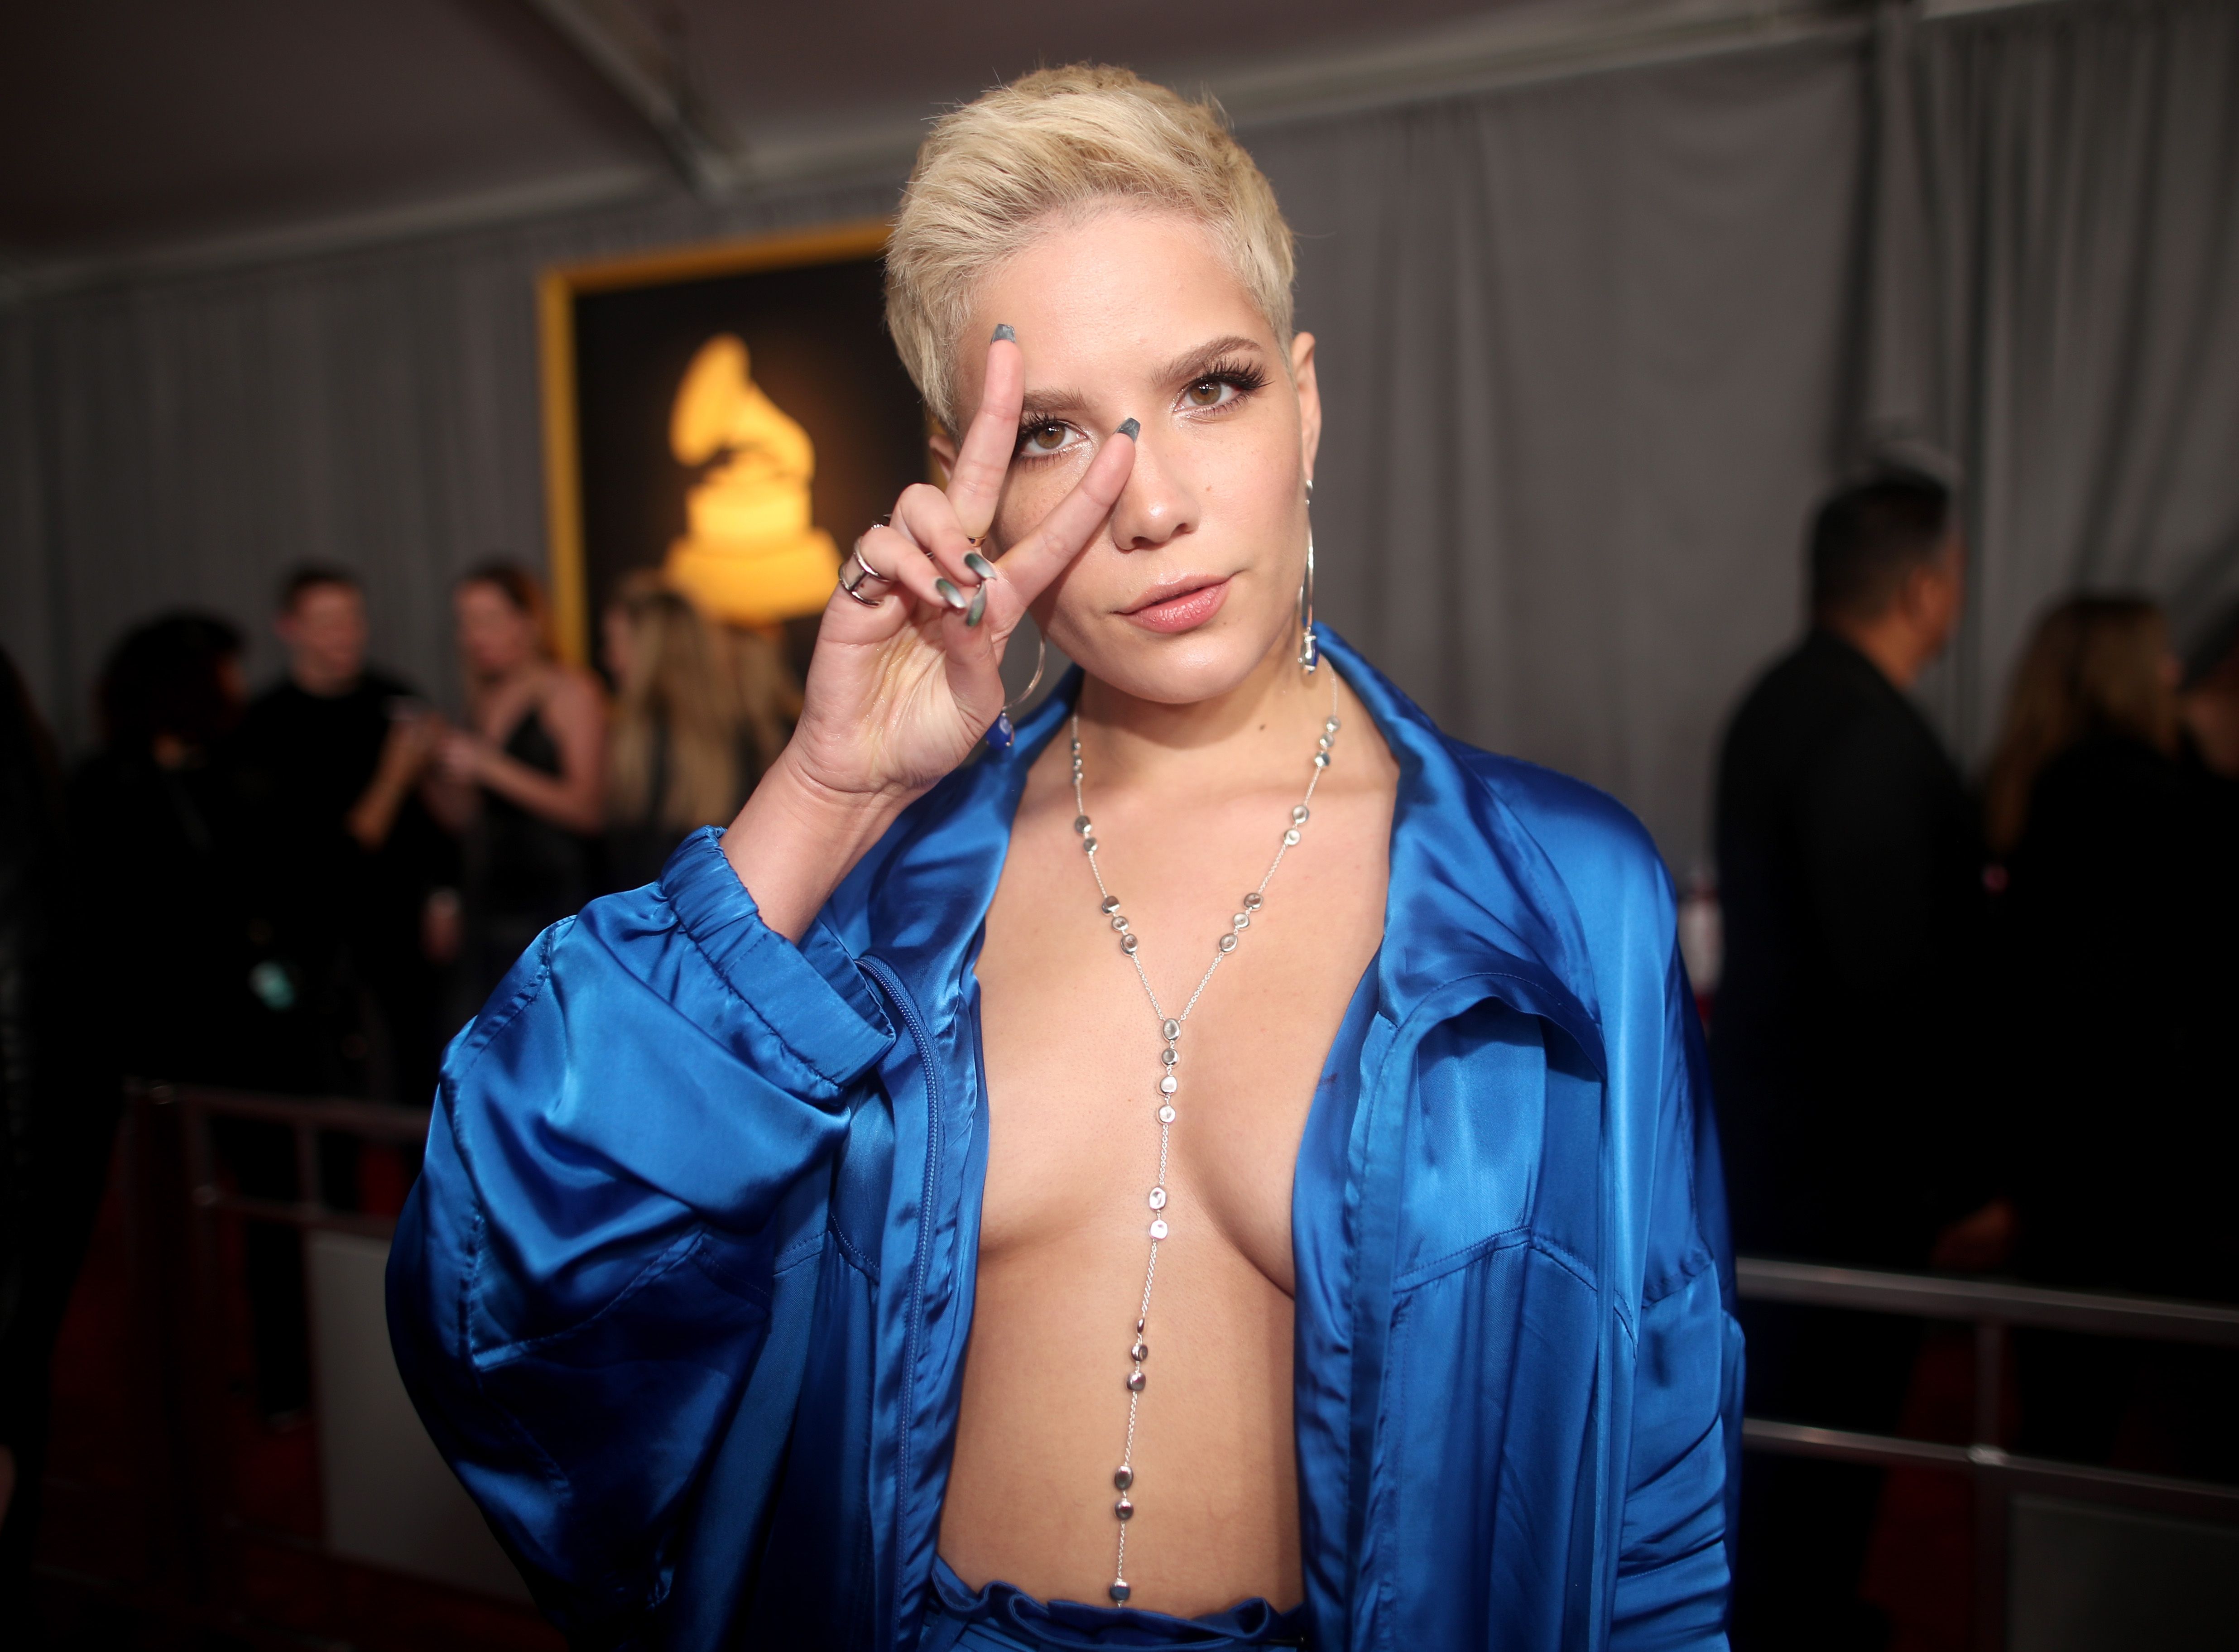 Sorry my boobs came out': Halsey suffers wardrobe malfunction